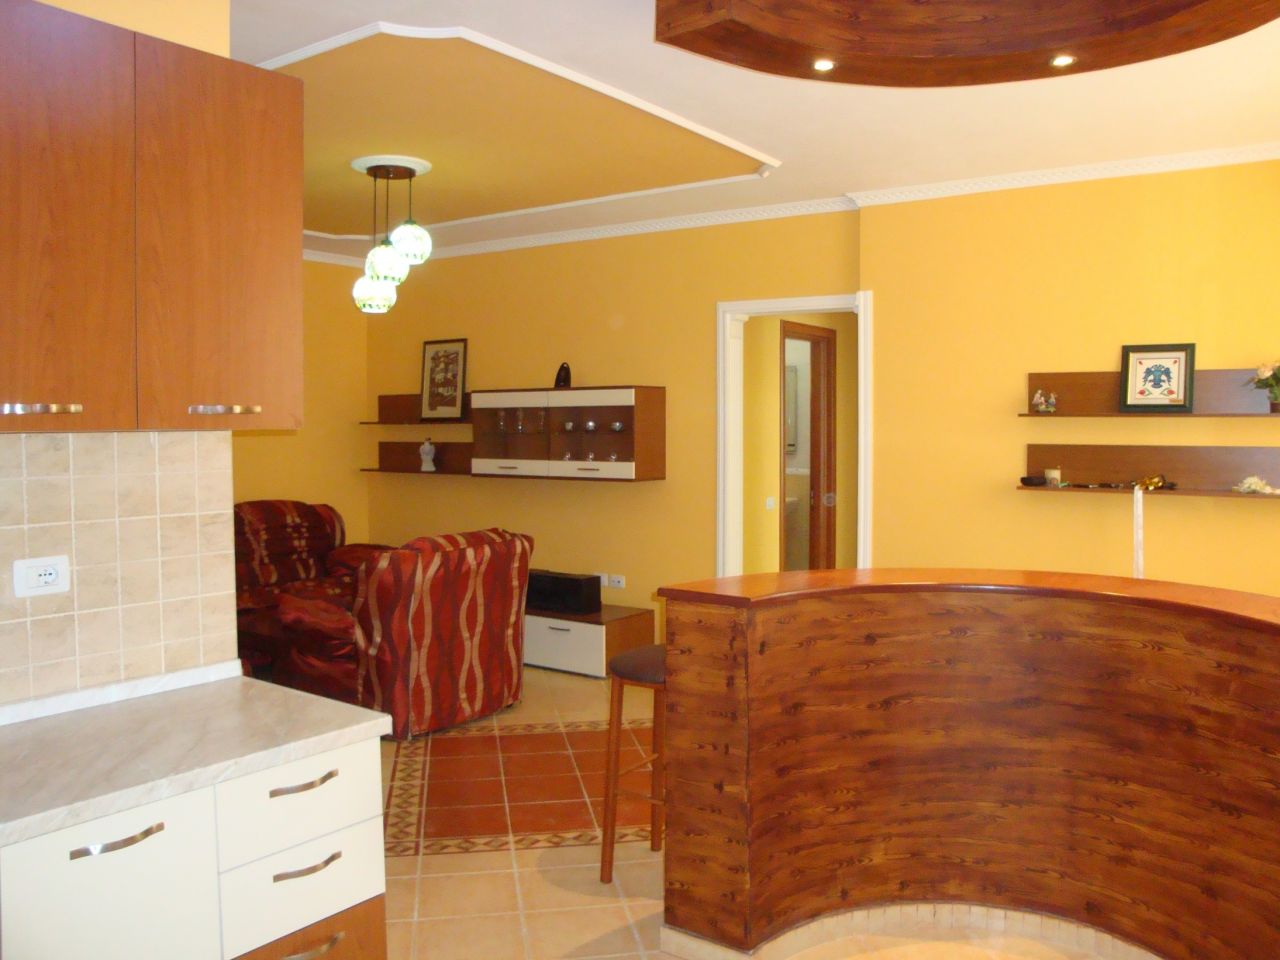 Apartment for rent in Tirana few minutes from the city center